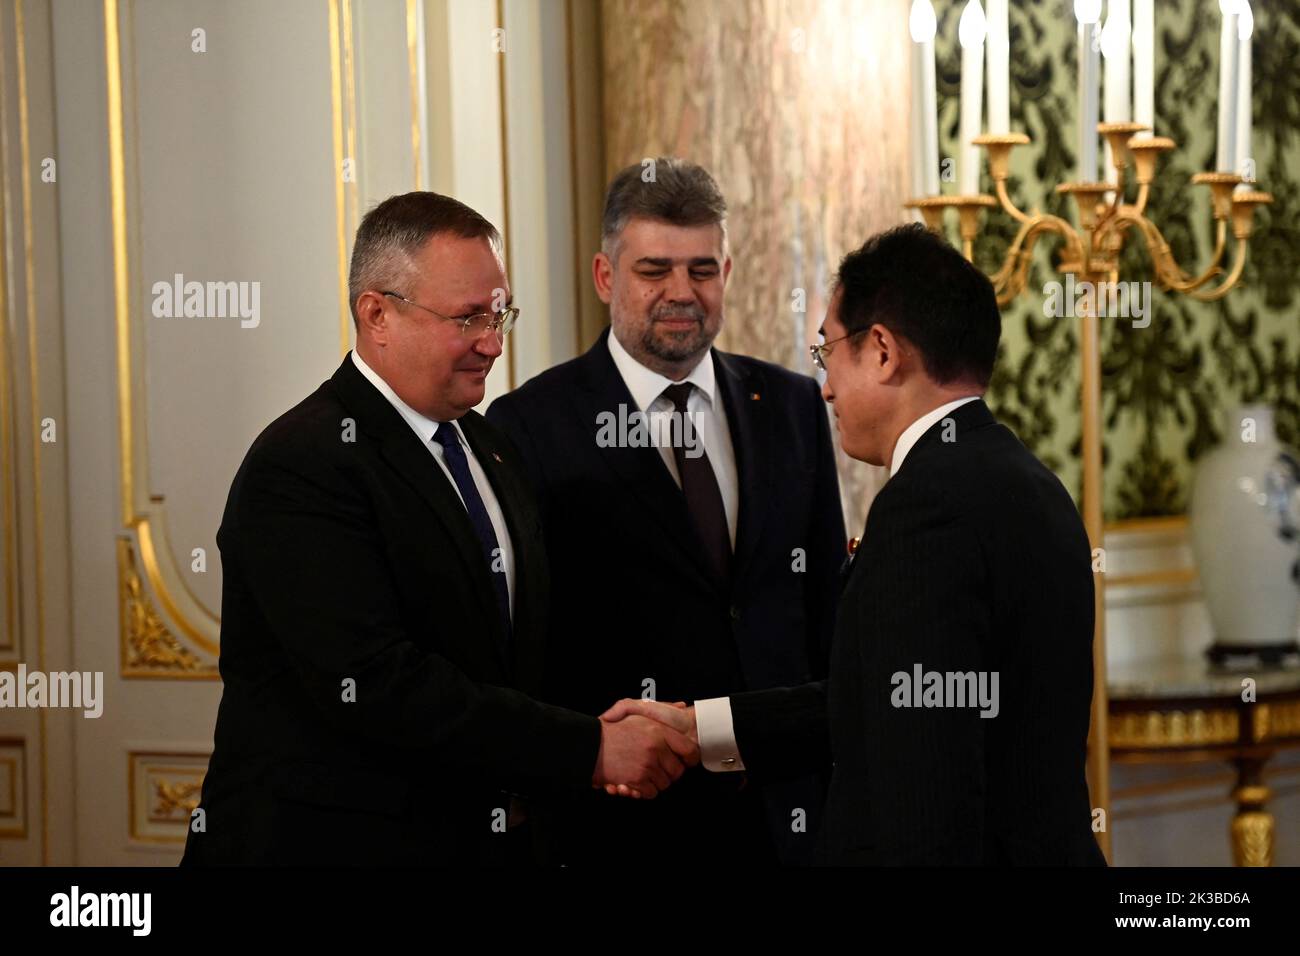 Romanian Prime Minister Nicolae Ionel Ciuca (L), Romanian House of Representatives Speaker Marcel Ciolacu (C) are welcomed by Japan's Prime Minister Fumio Kishida (R) prior to the Japan-Romania Summit Meeting at Akasaka Palace State Guest House in Tokyo, Japan on September 26, 2022 in Tokyo, Japan.  David Mareuil/Pool via REUTERS Stock Photo